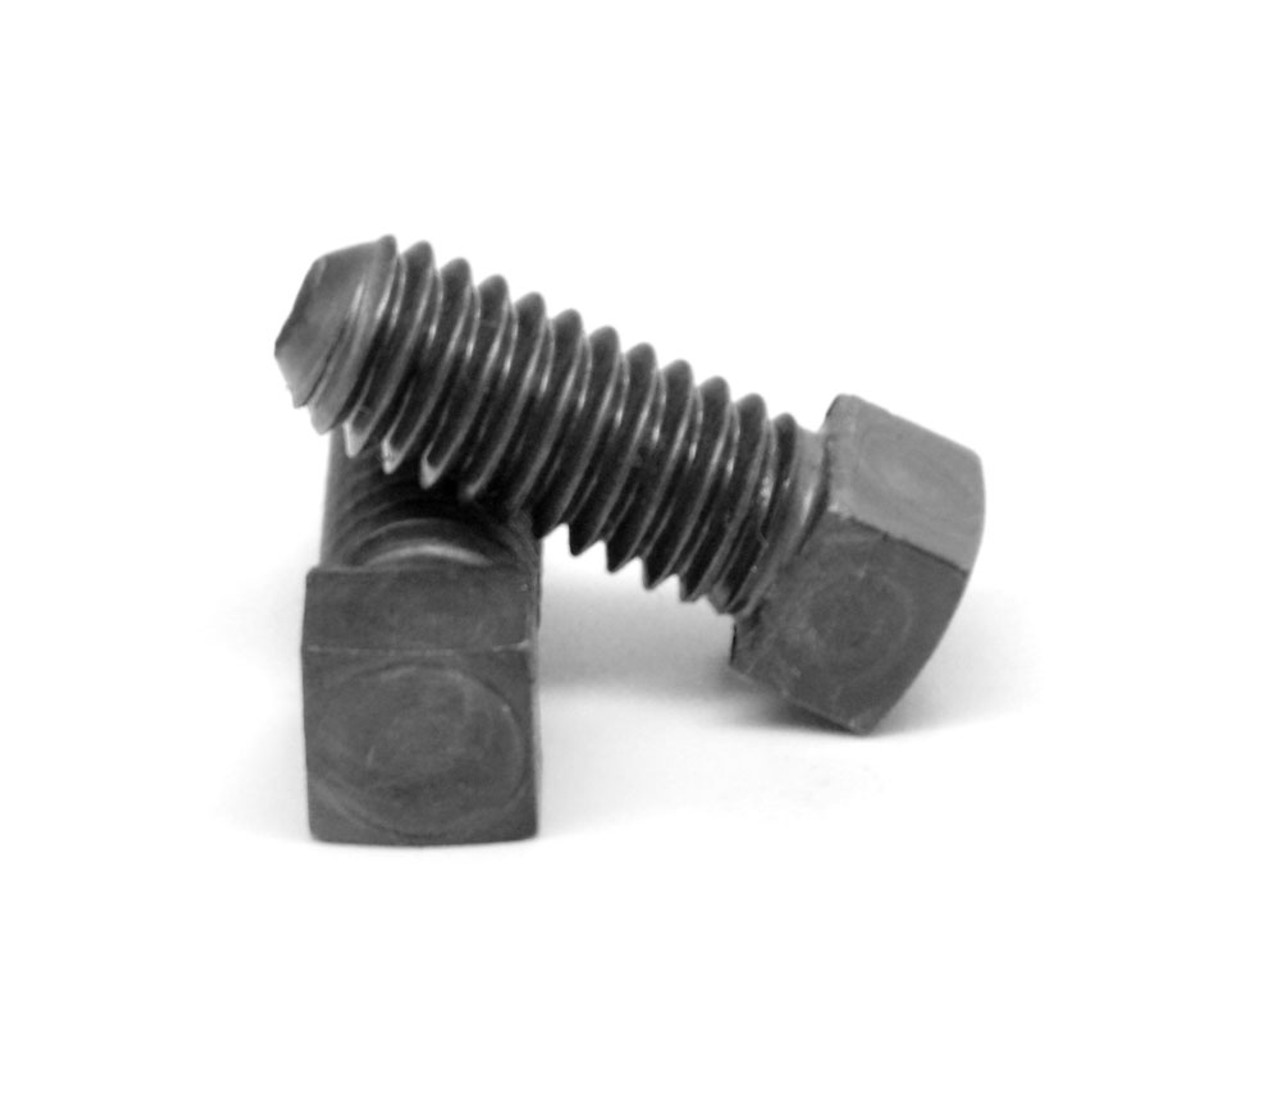 7/16"-14 x 4 1/2" (FT) Coarse Thread Square Head Set Screw Cup Point Low Carbon Steel Case Hardened Plain Finish